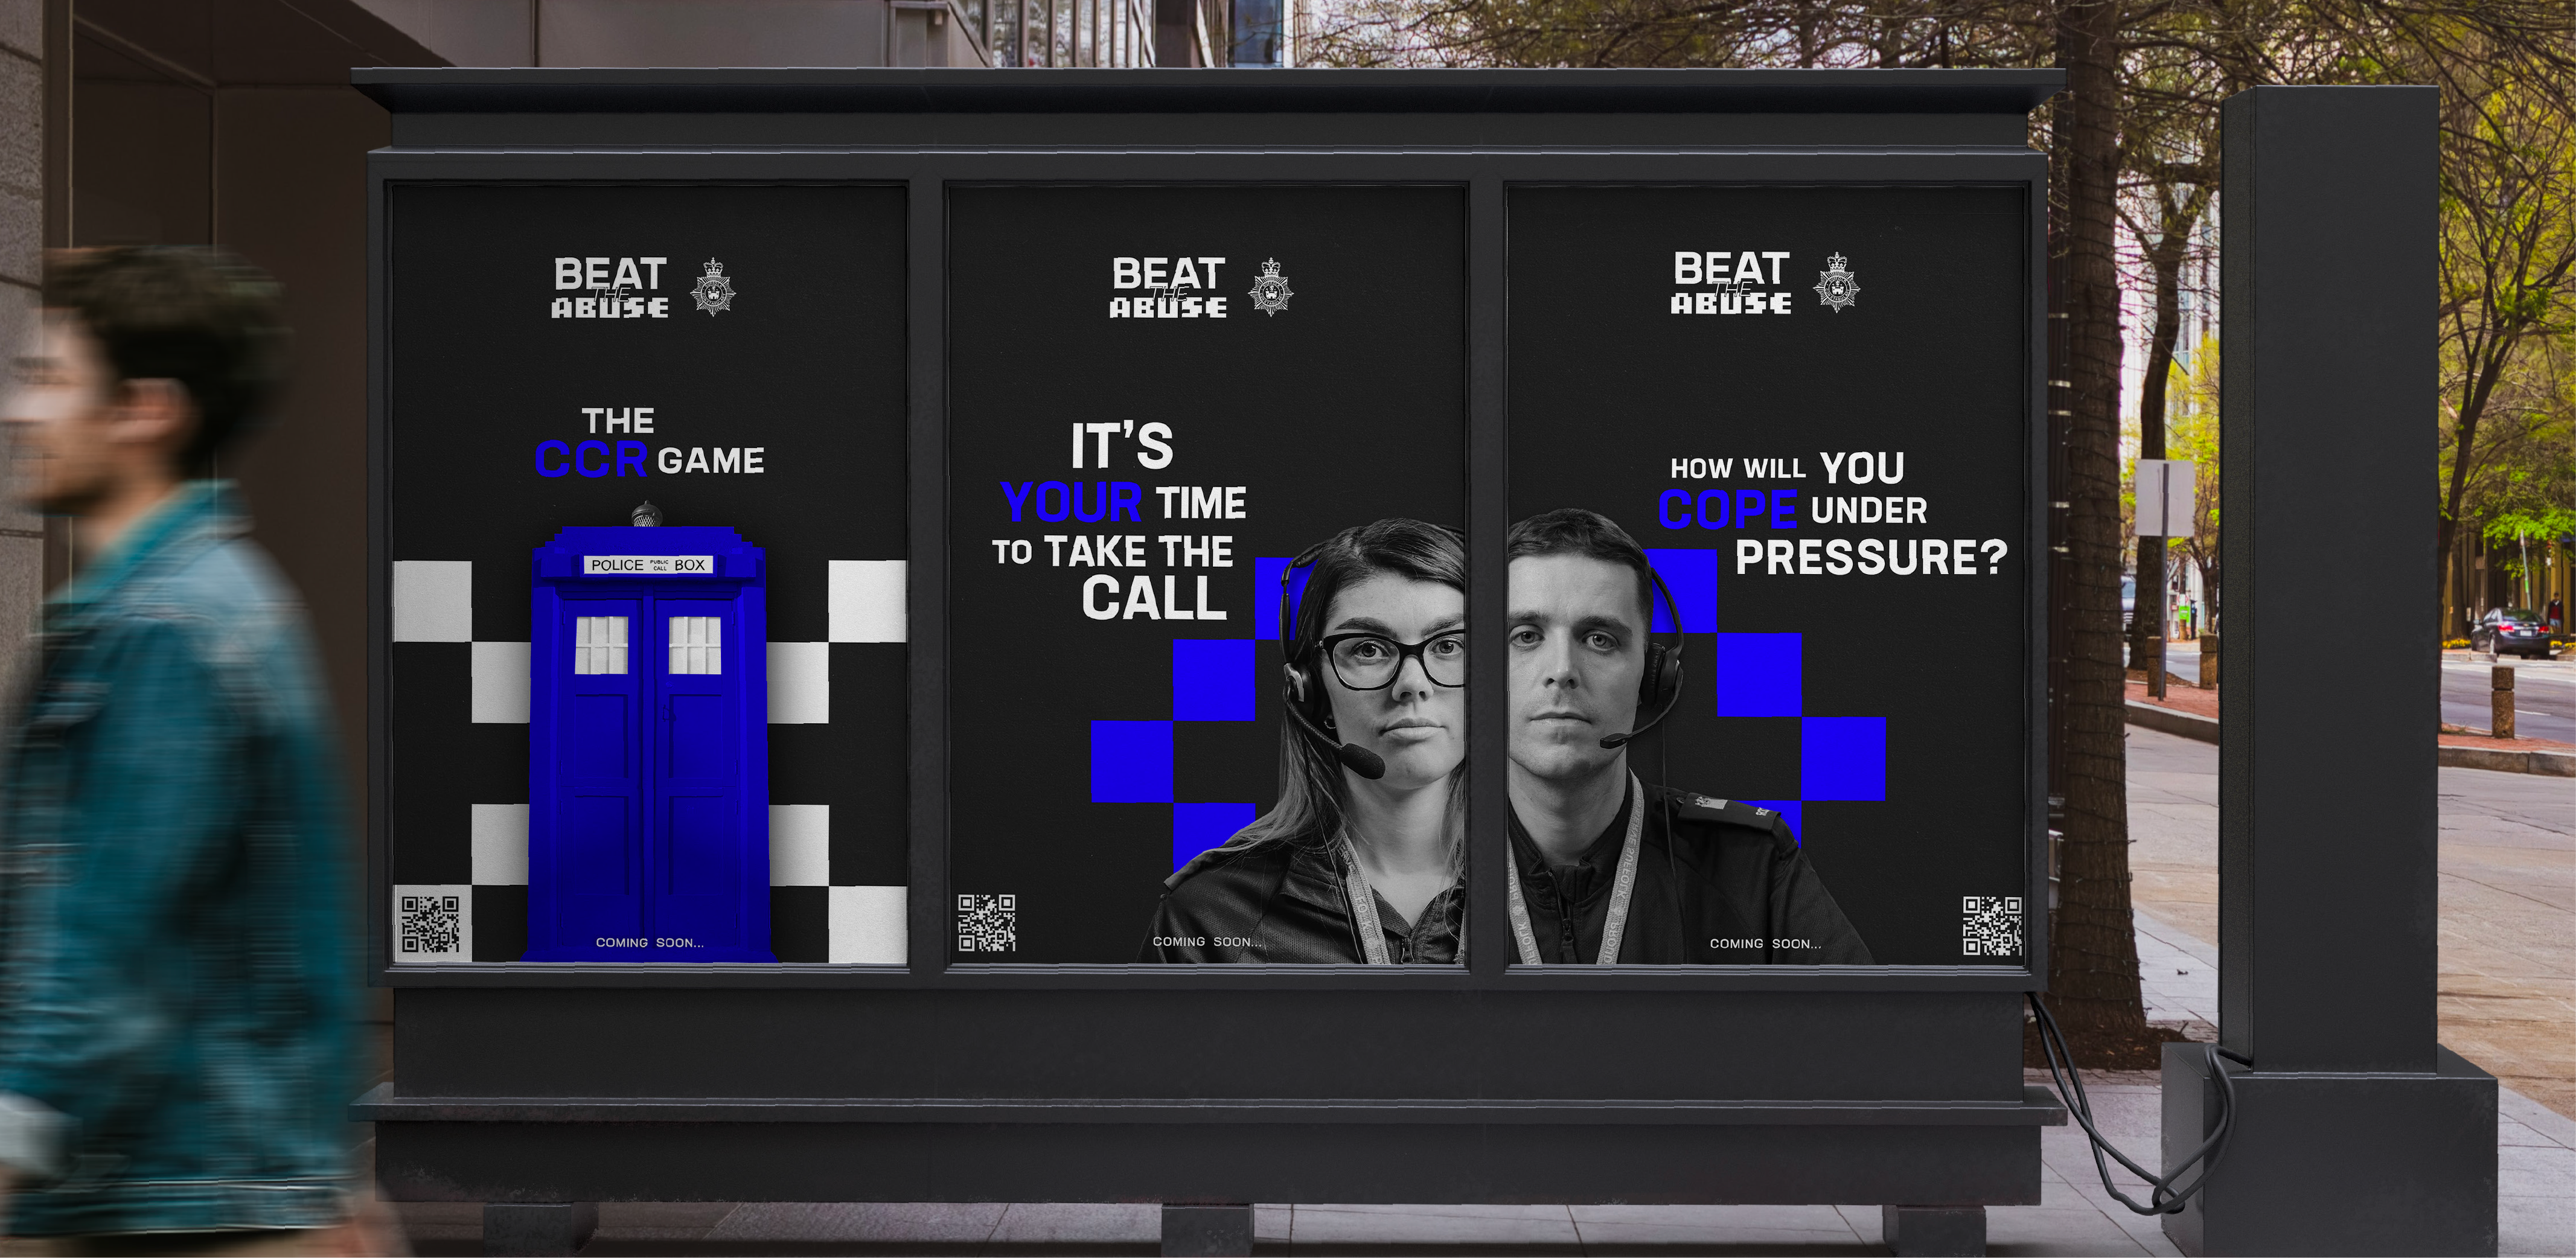 Mock up of 3 high street adverts featuring posters for a police campaign